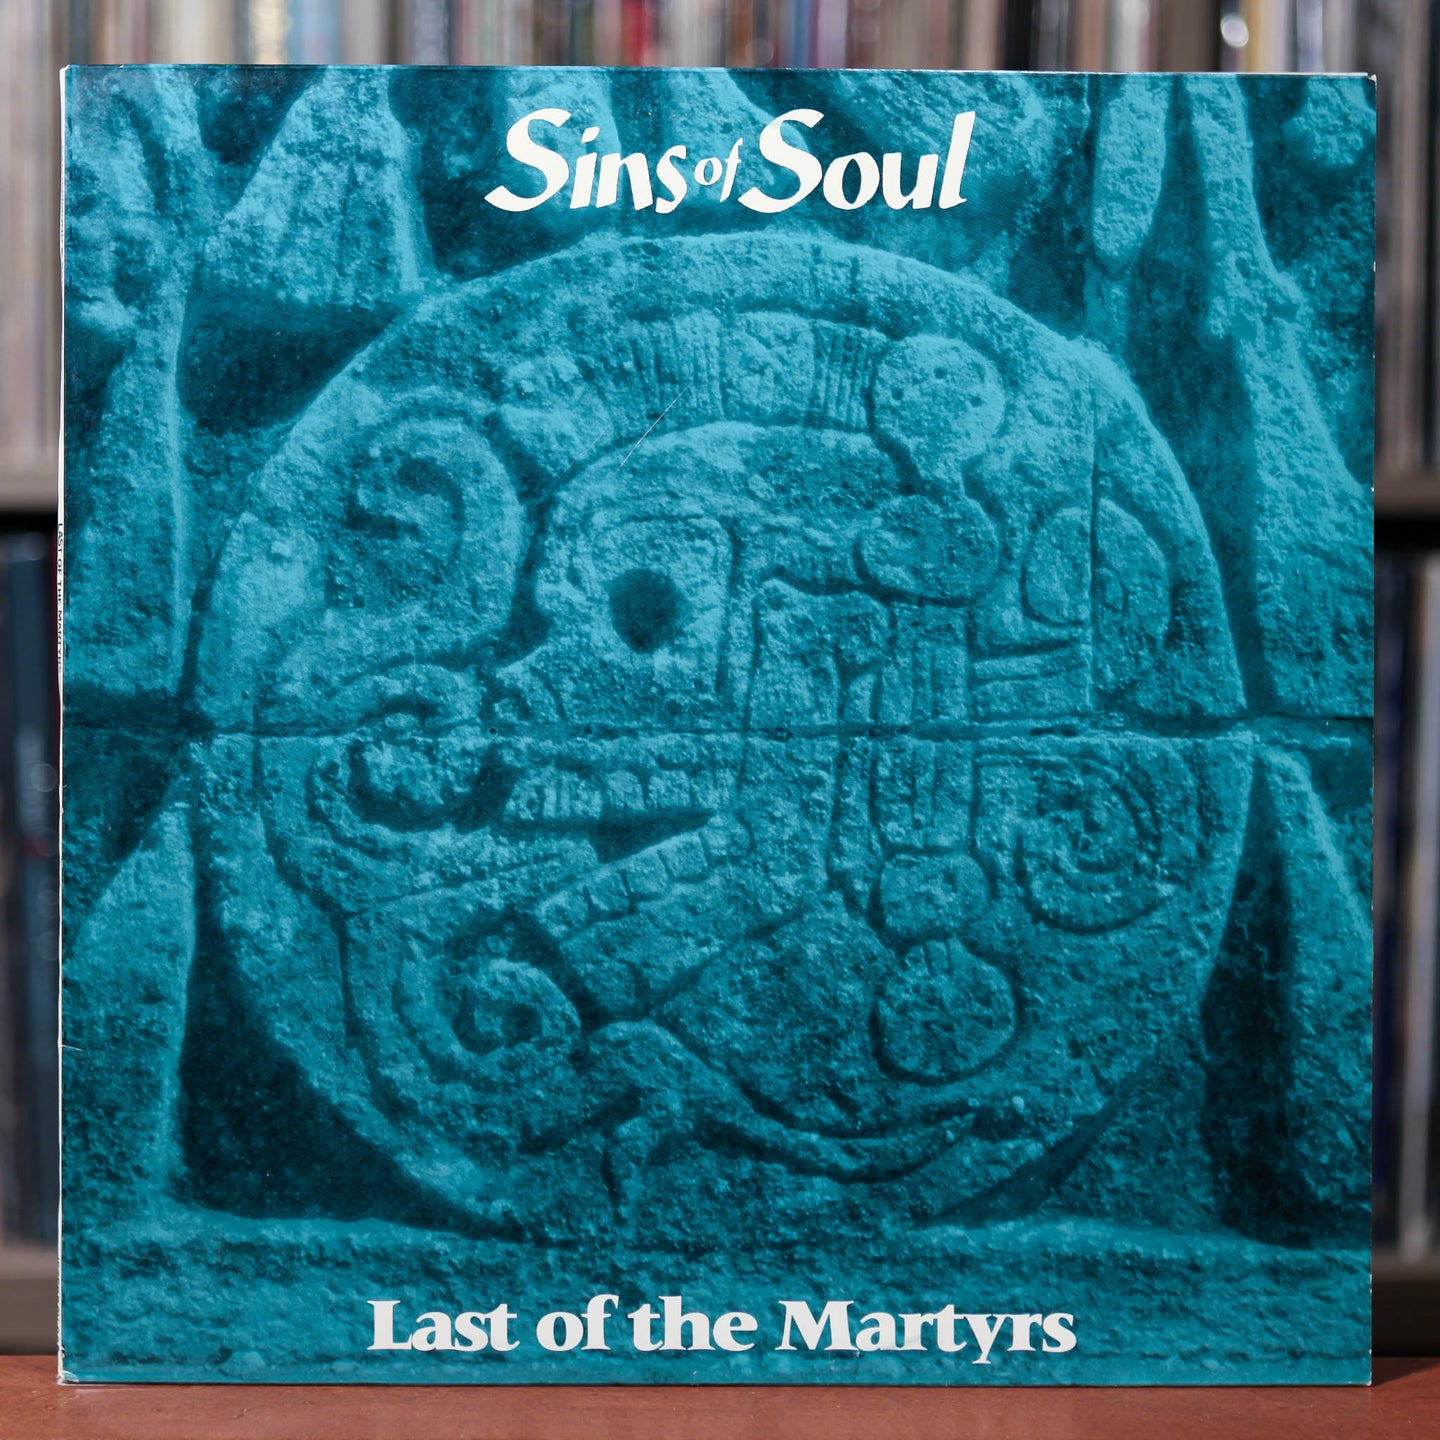 Ian Hammond and Sins of Soul - Last of the Martyrs - 1989 Jeterboy, VG+/EX